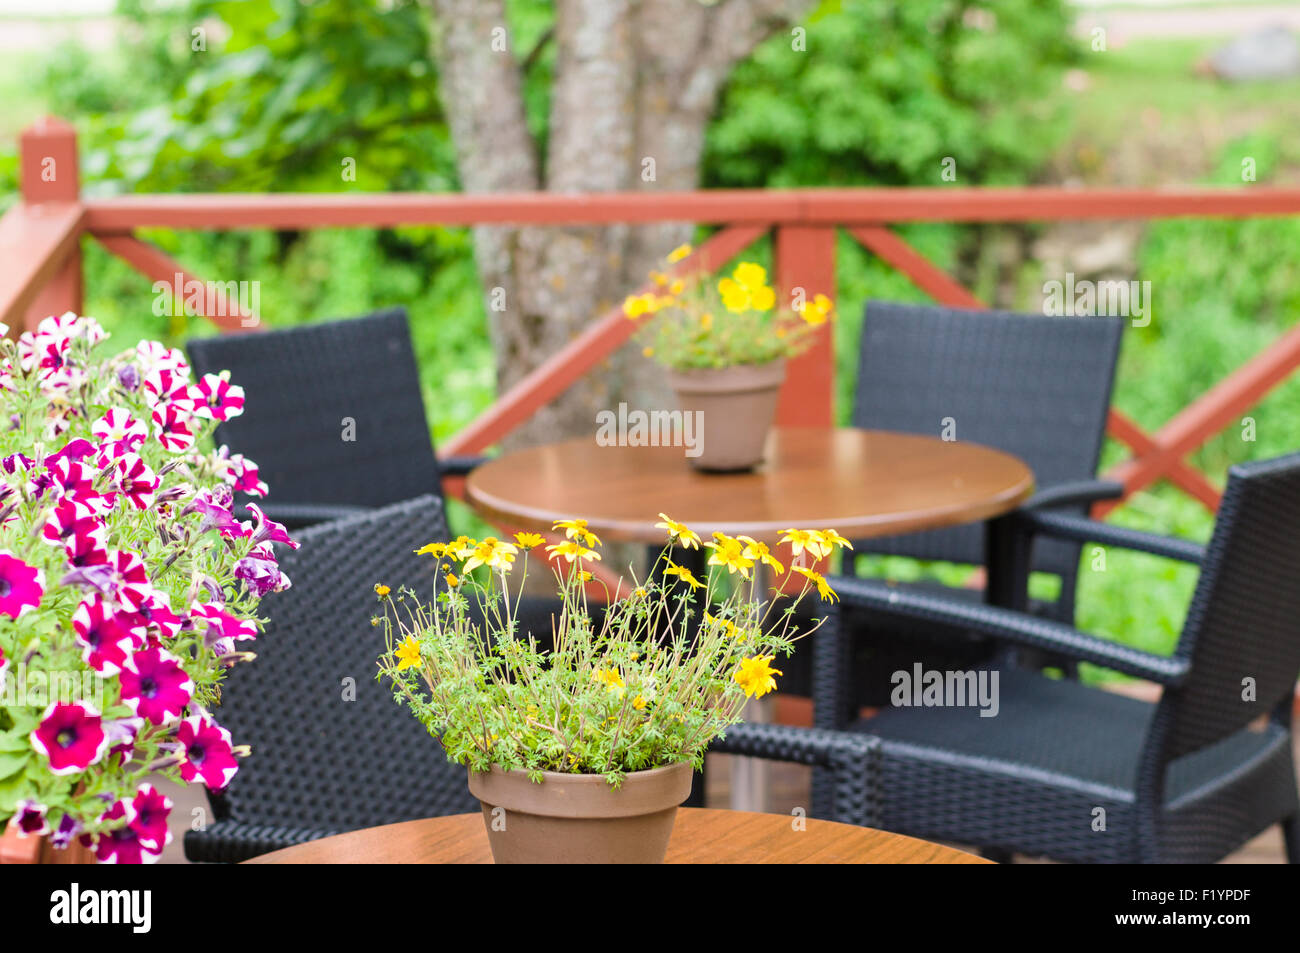 Blurred image of outdoor terrace cafe with flower pots Stock Photo